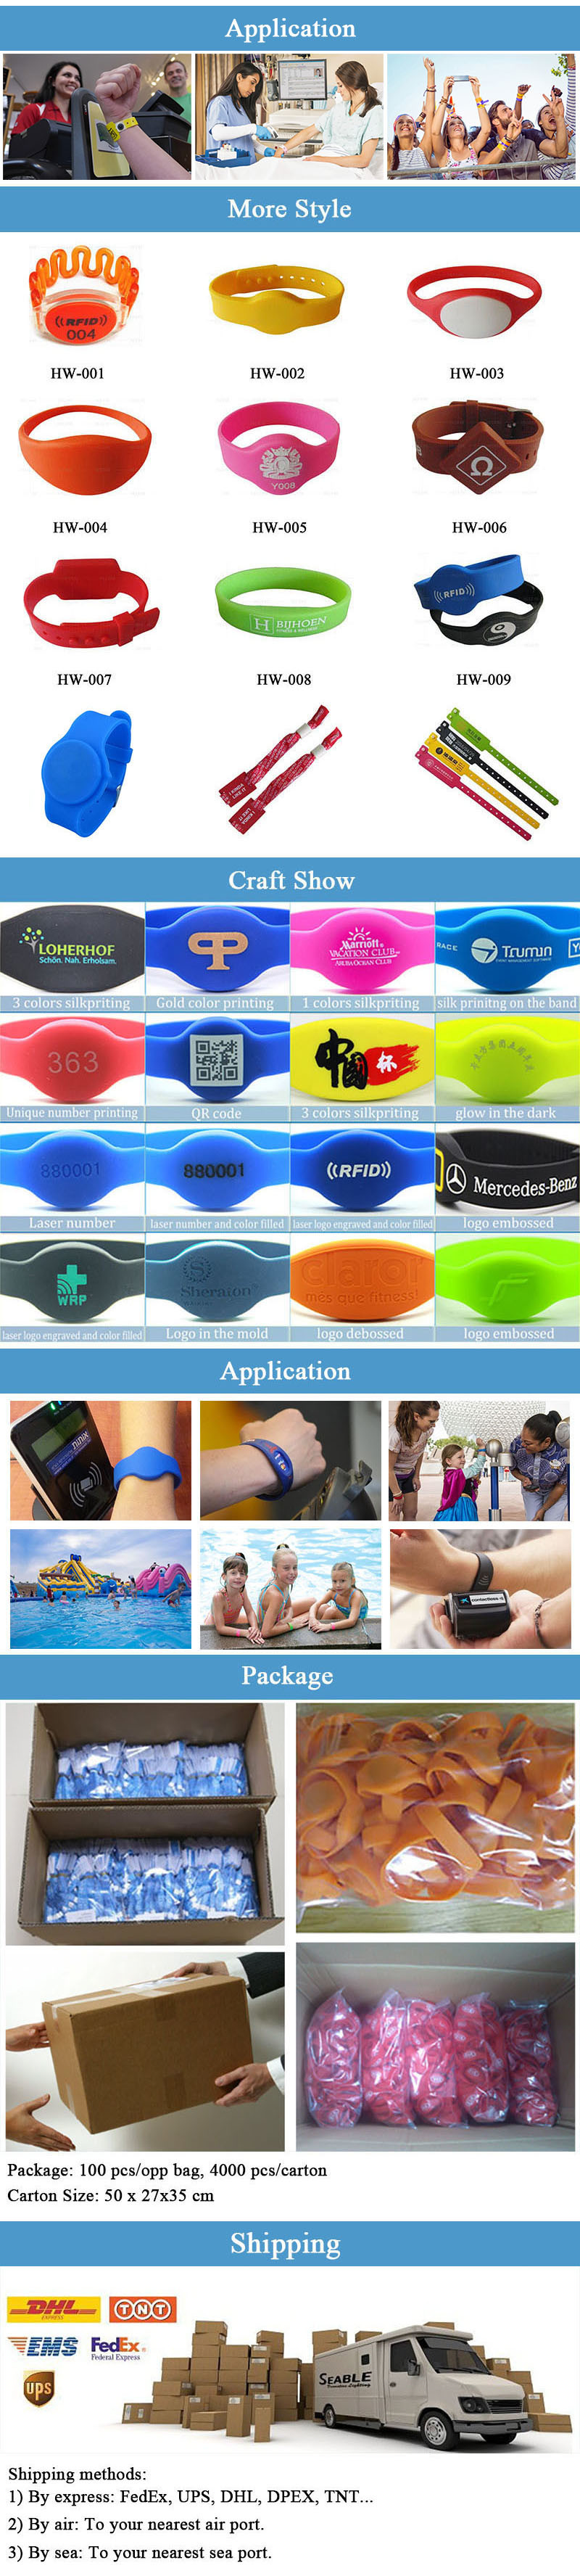 Top Qualify Hf ISO14443A S50 RFID Flat-Head Silicone Wristband